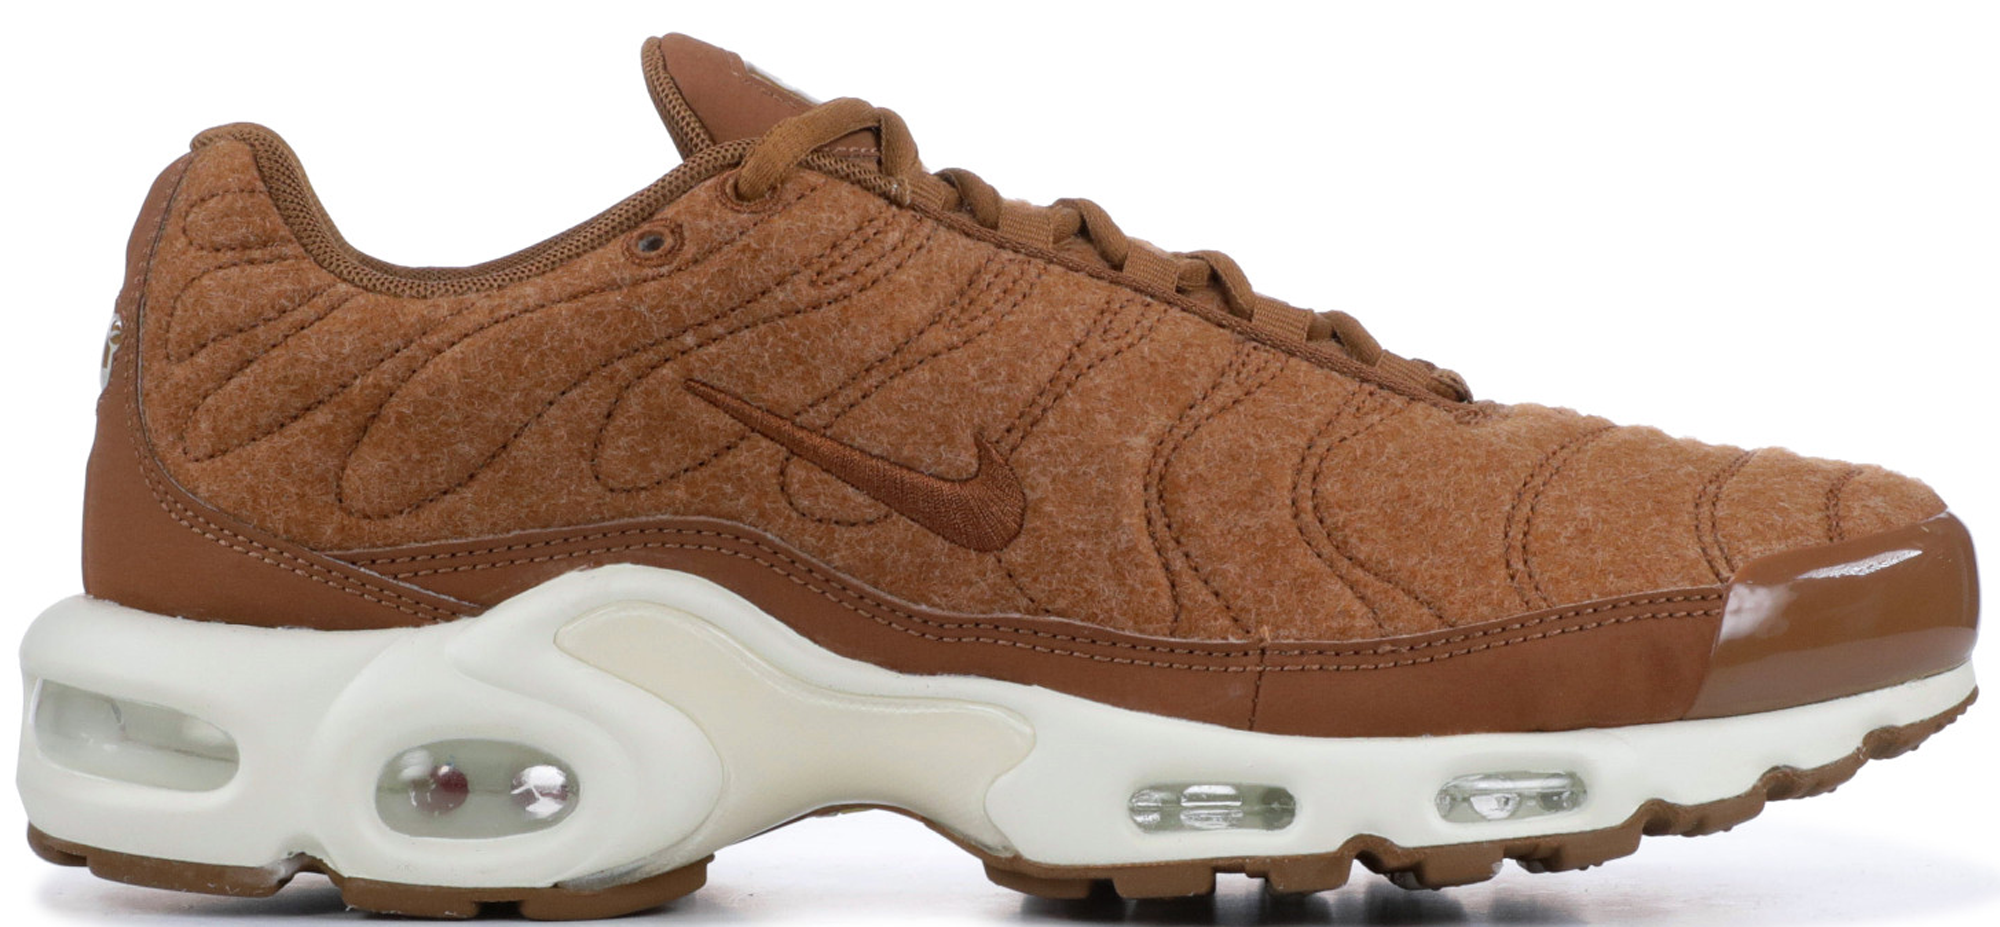 Nike Air Max Plus Quilted Ale Brown 